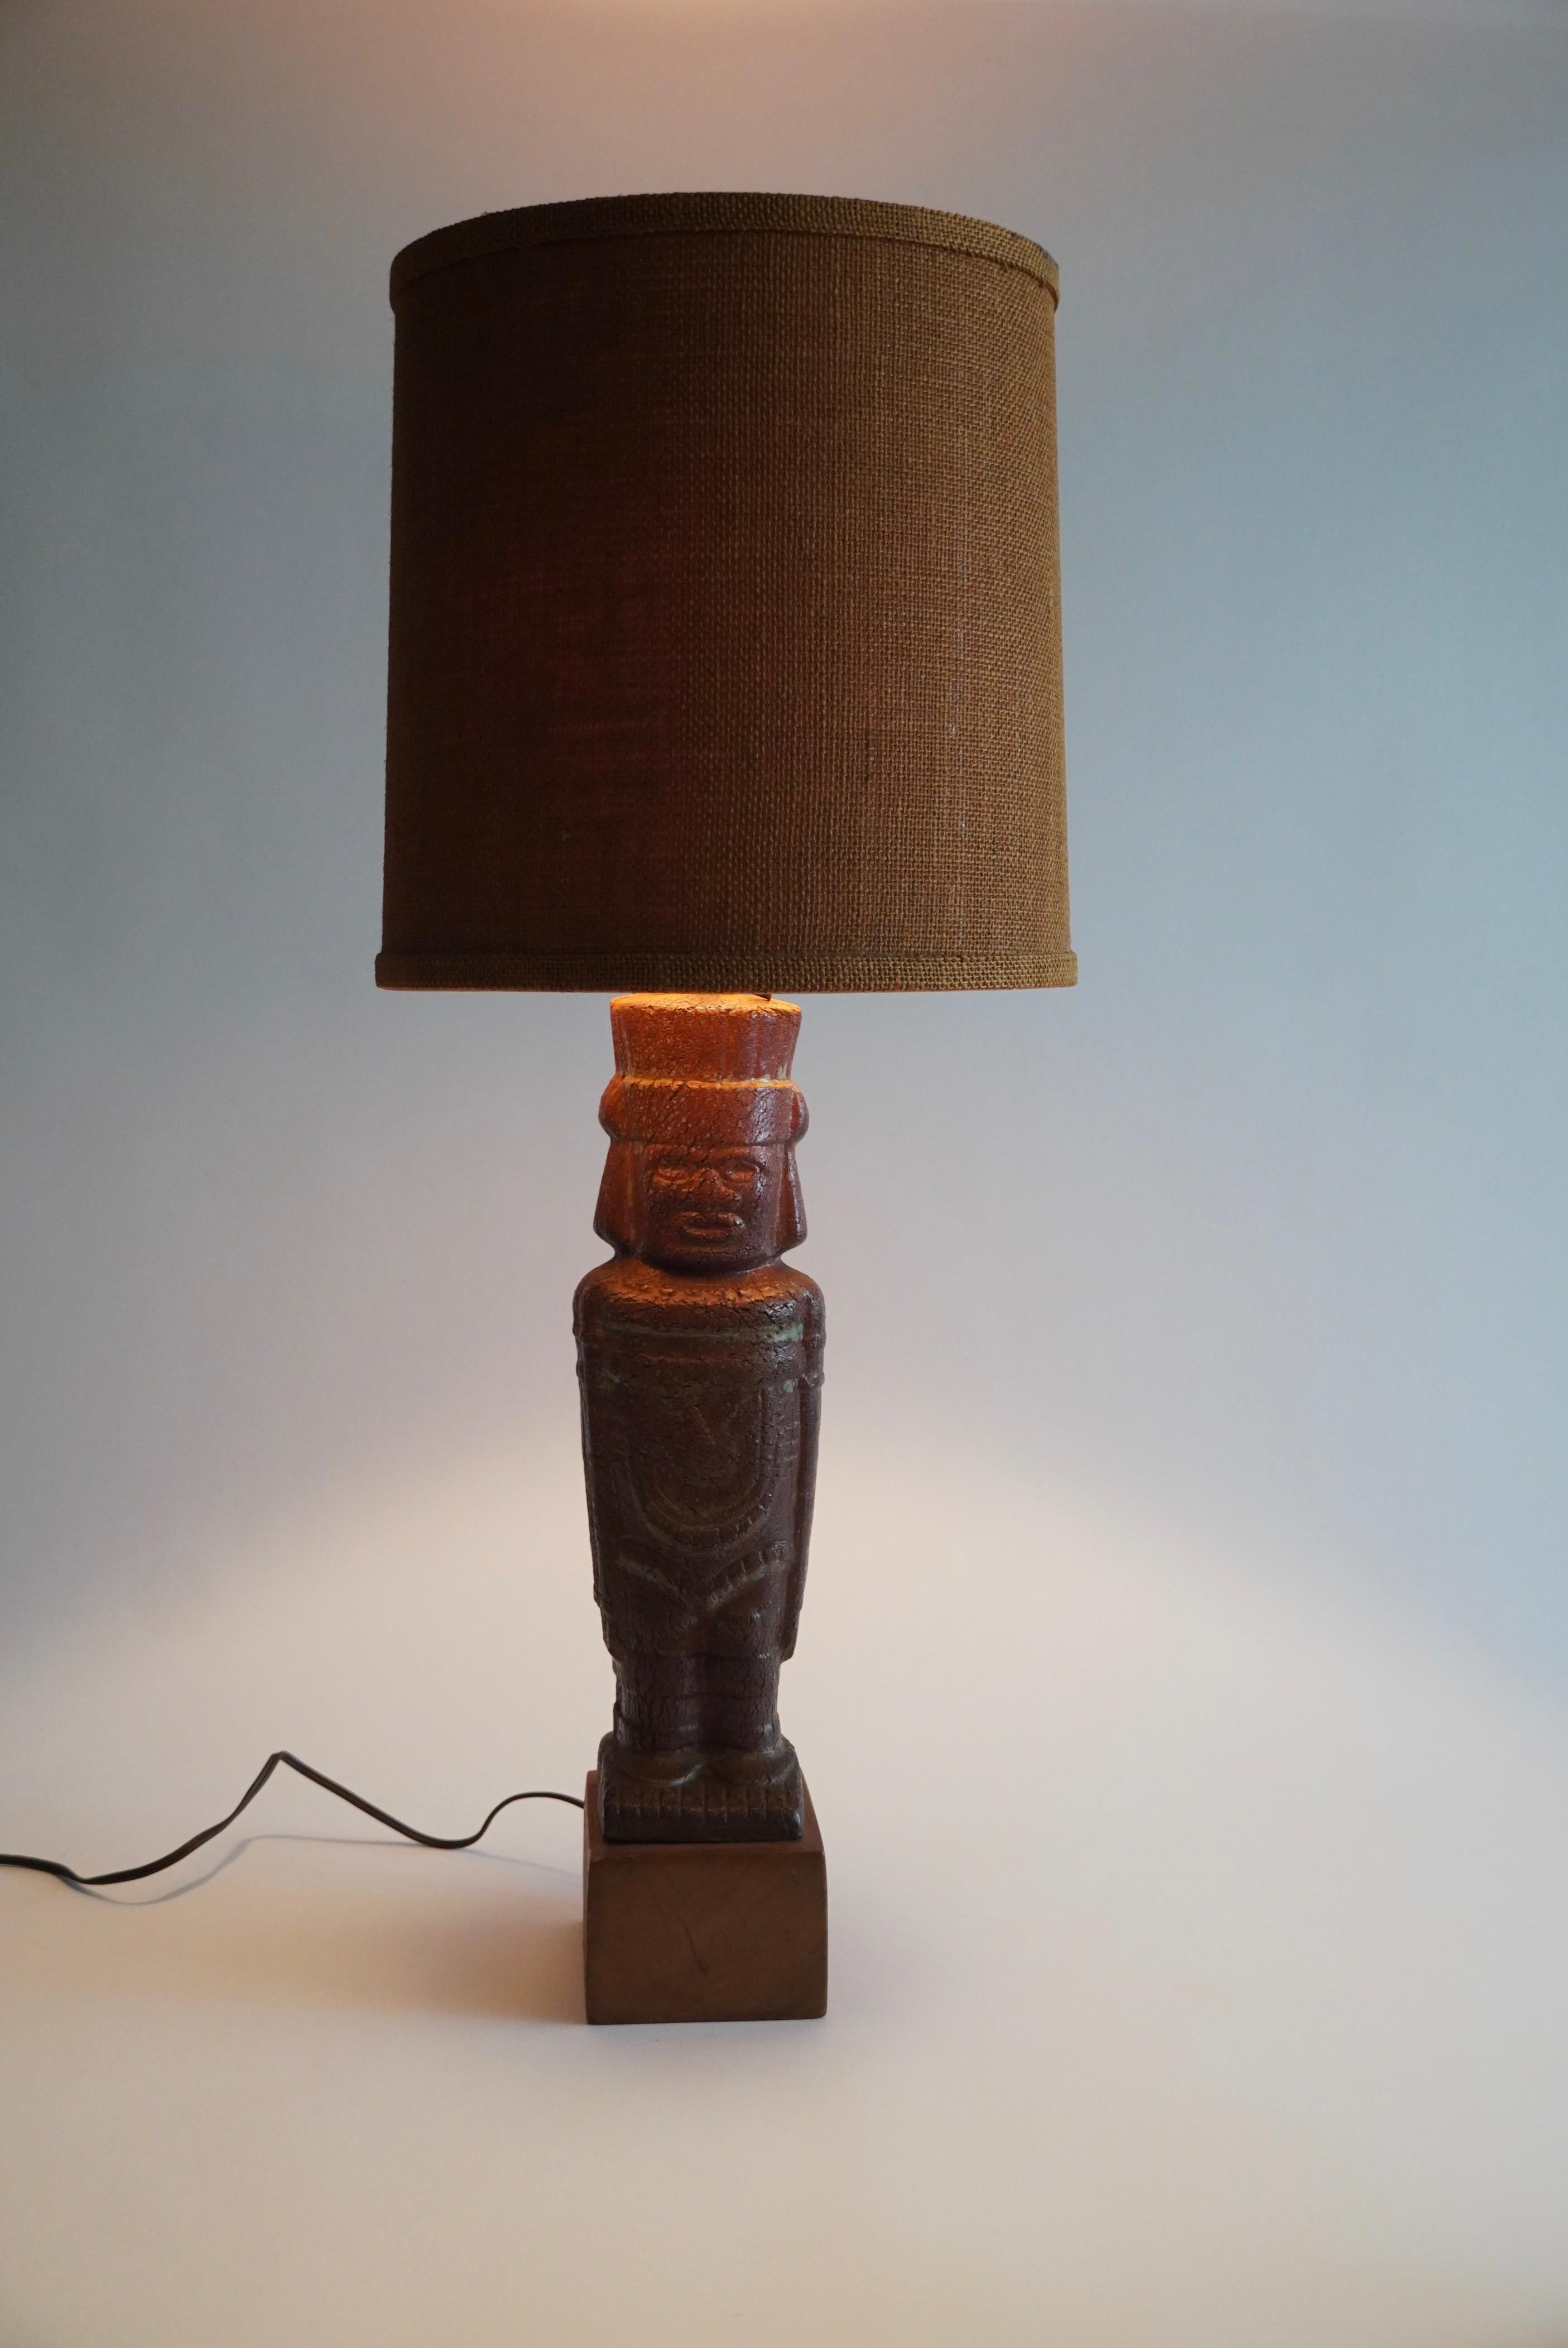 1950s Ceramic table lamp with a stylized Aztec figure with its original burlap covered lamp shade. The figure is done in a rich earth toned brown crackle glaze with some green accents in the glaze and is mounted a top a wooden base.